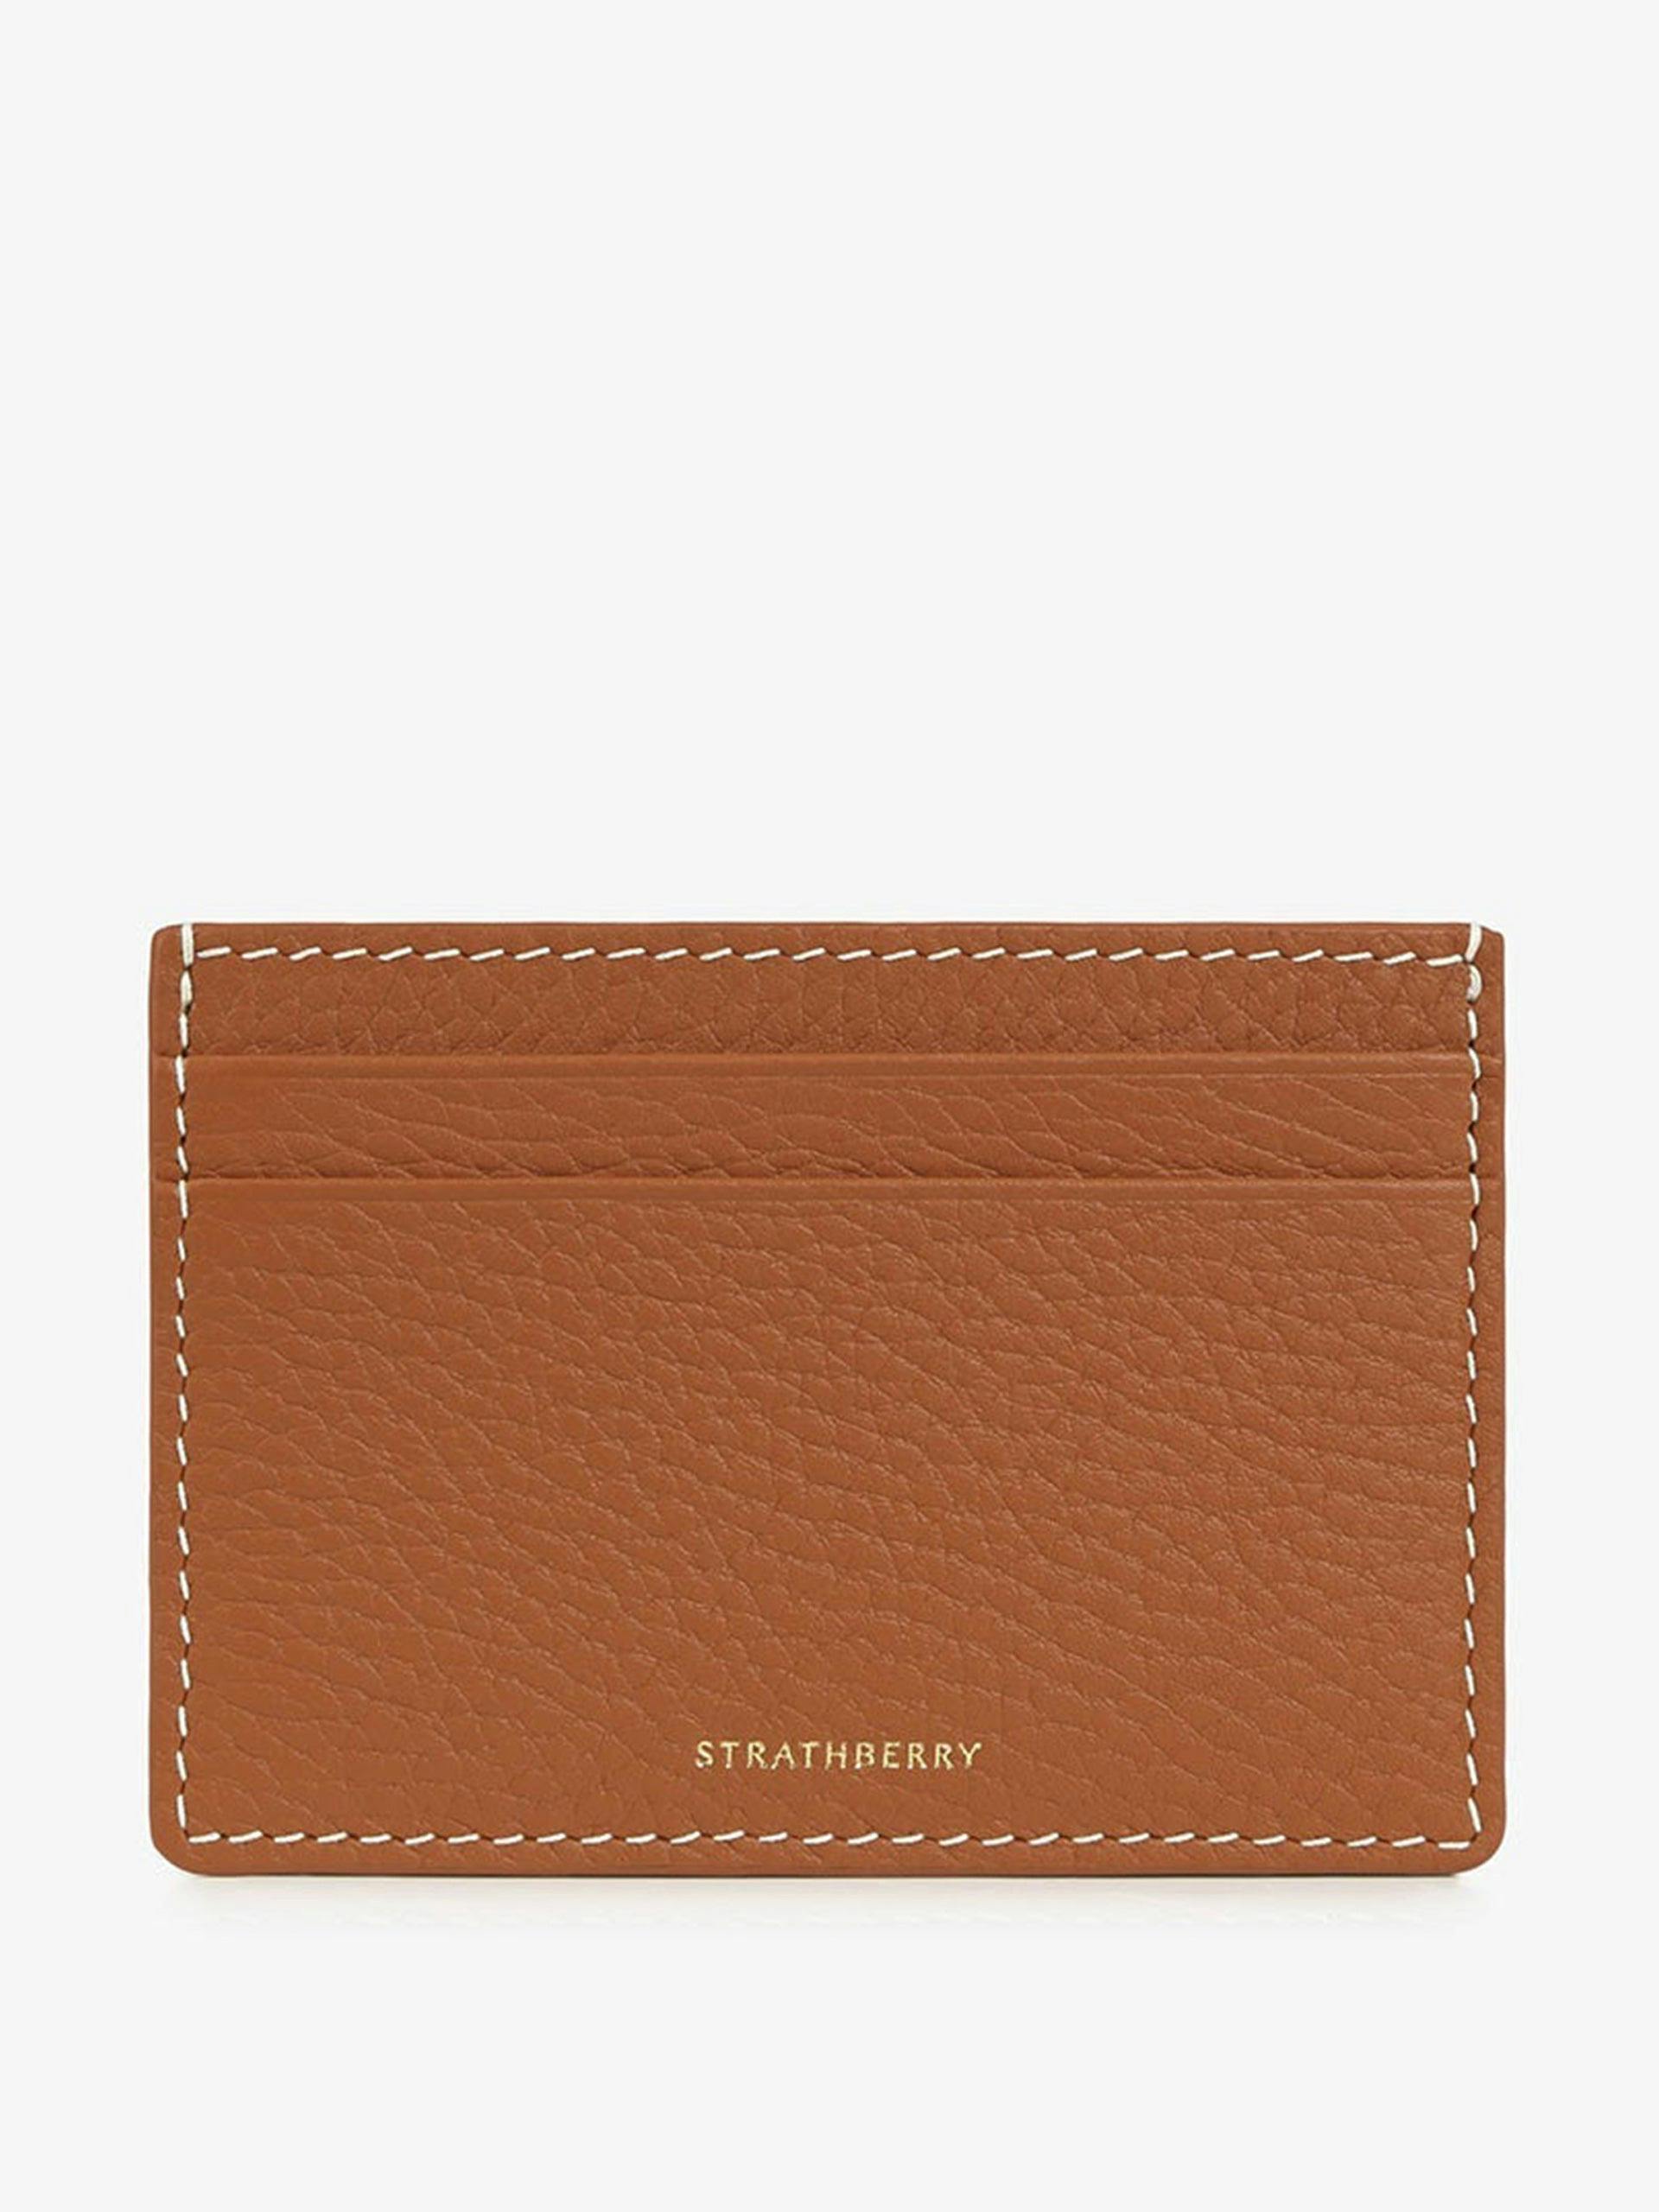 Tan Cardholder with white stitching